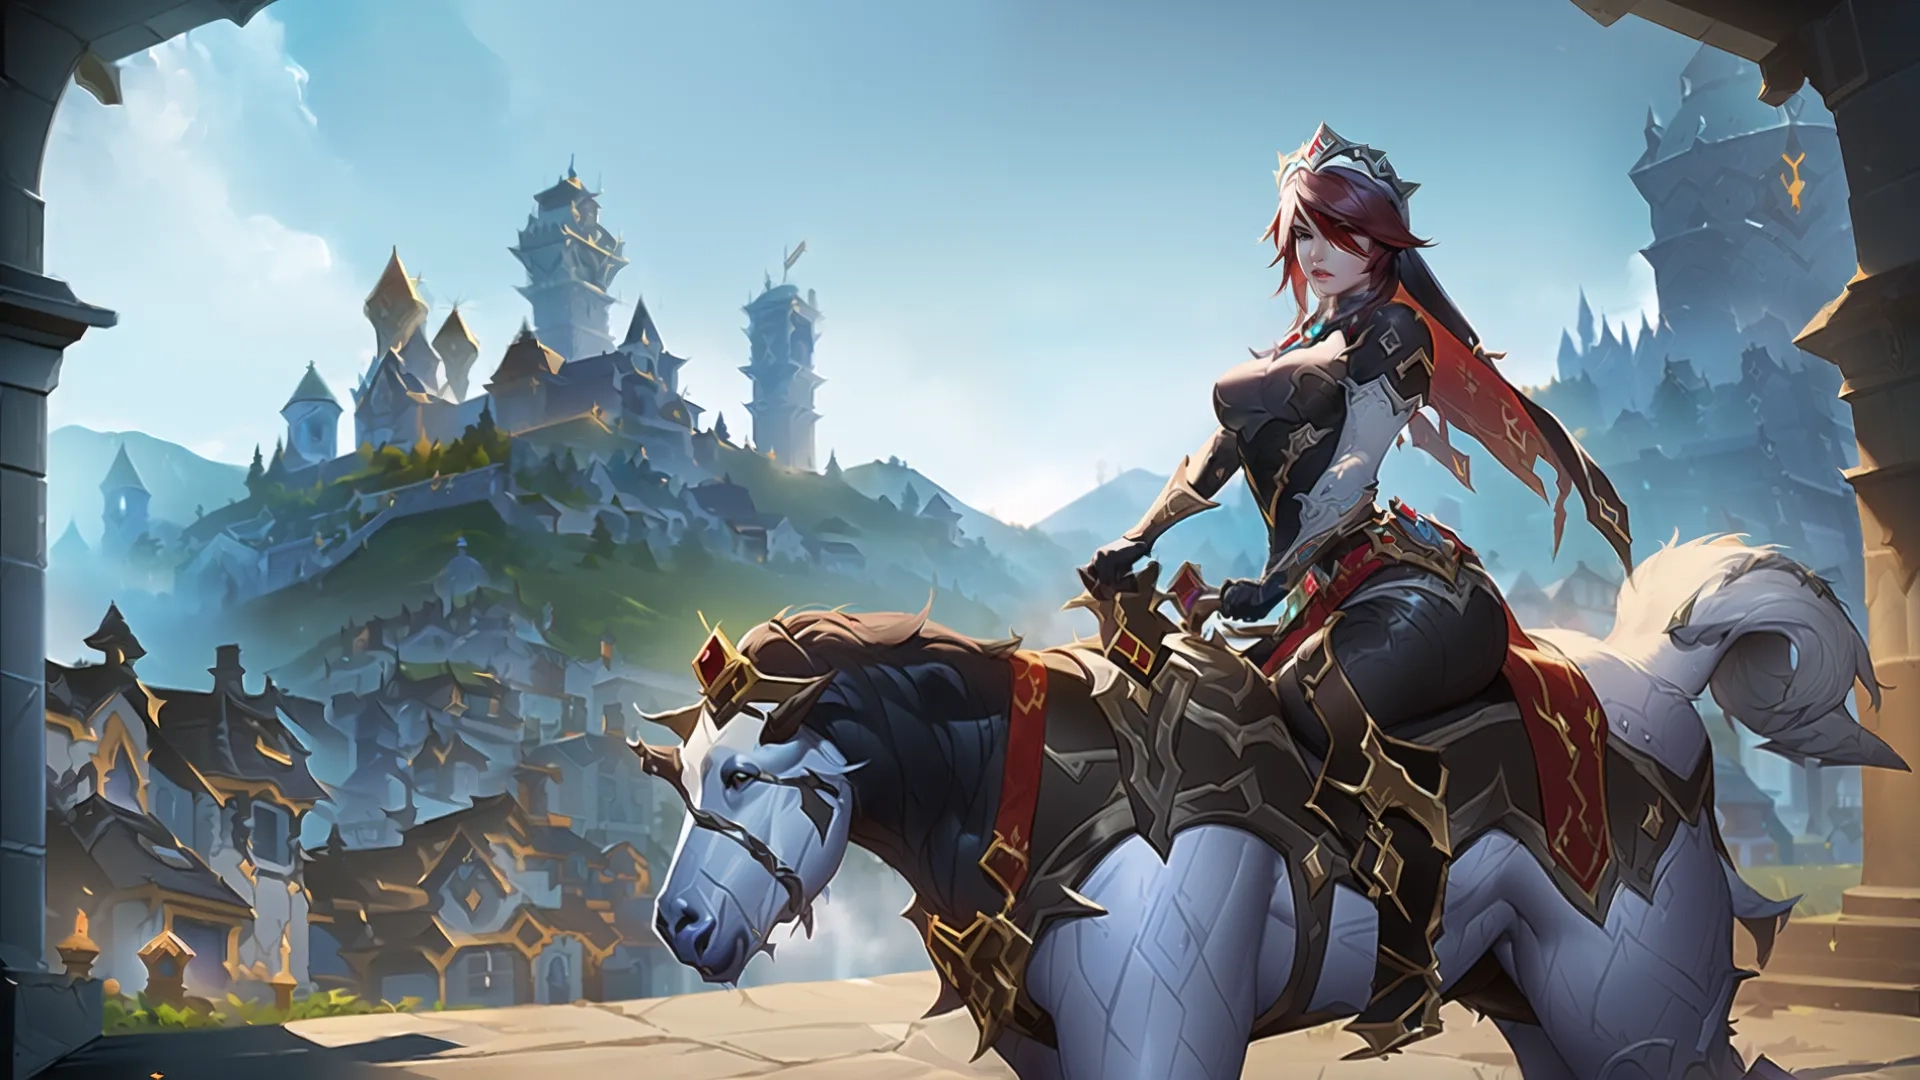 the character rides on her horse through a narrow arch in a fantasy world with many buildings and castles behind her's walls and columns are also ruins
